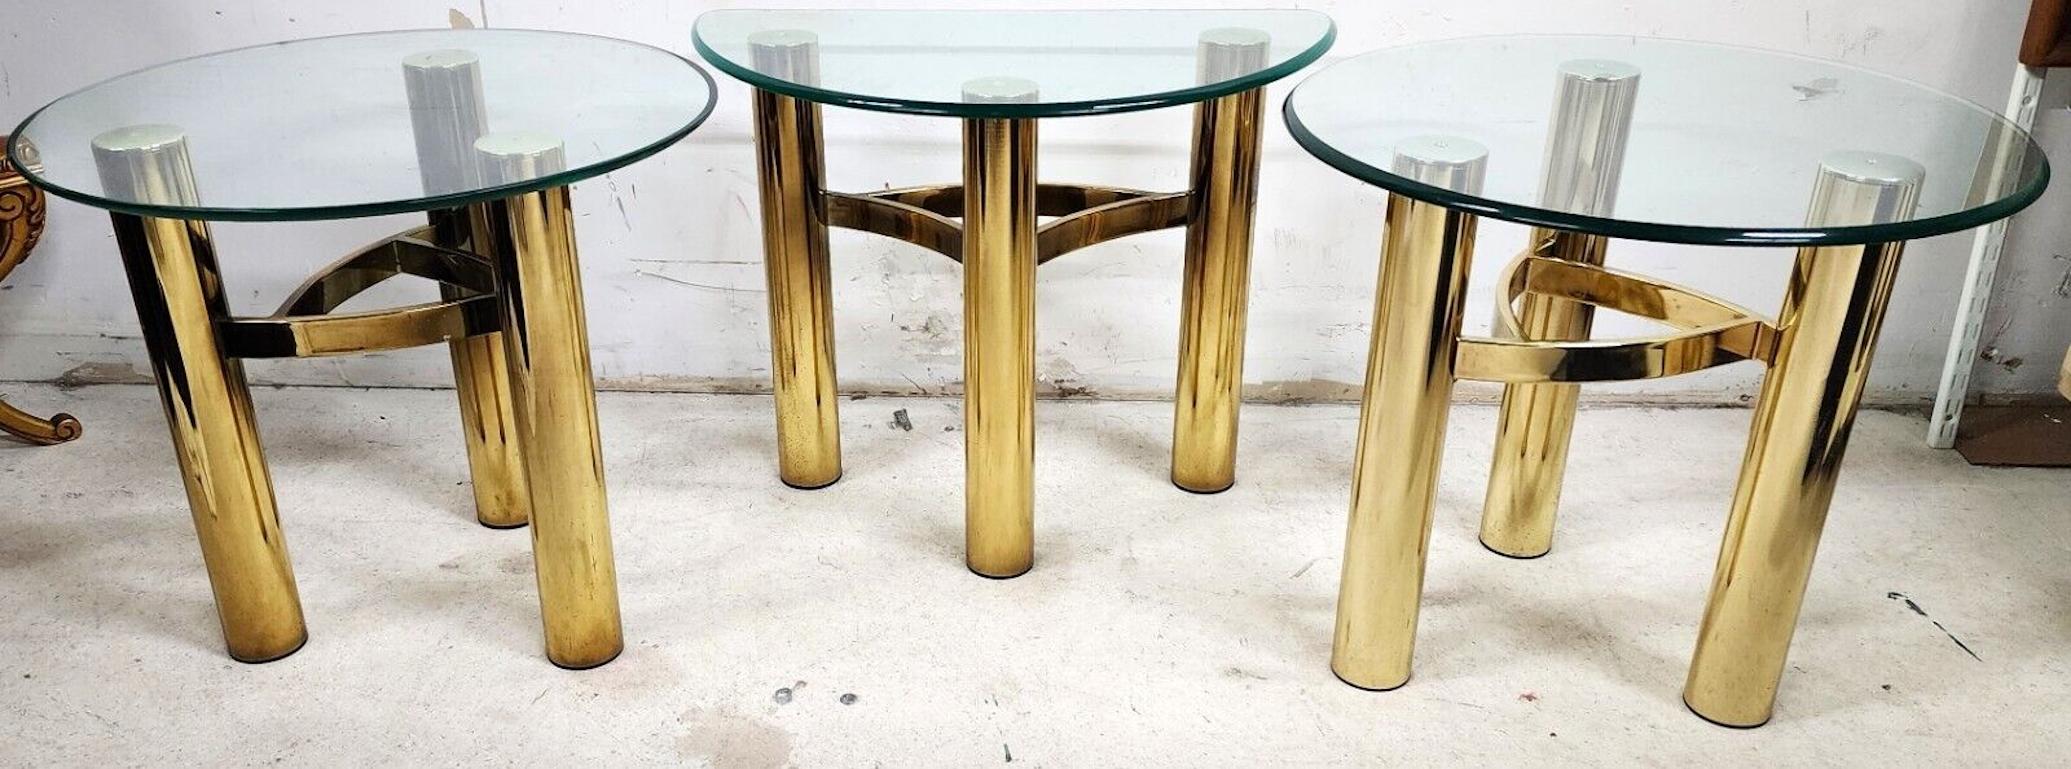 For FULL item description click on CONTINUE READING at the bottom of this page.

Offering One Of Our Recent Palm Beach Estate Fine Furniture Acquisitions Of A
3 Piece Set of MCM Tubular Brass Tables
Includes 2 round and 1 demilune (half moon)